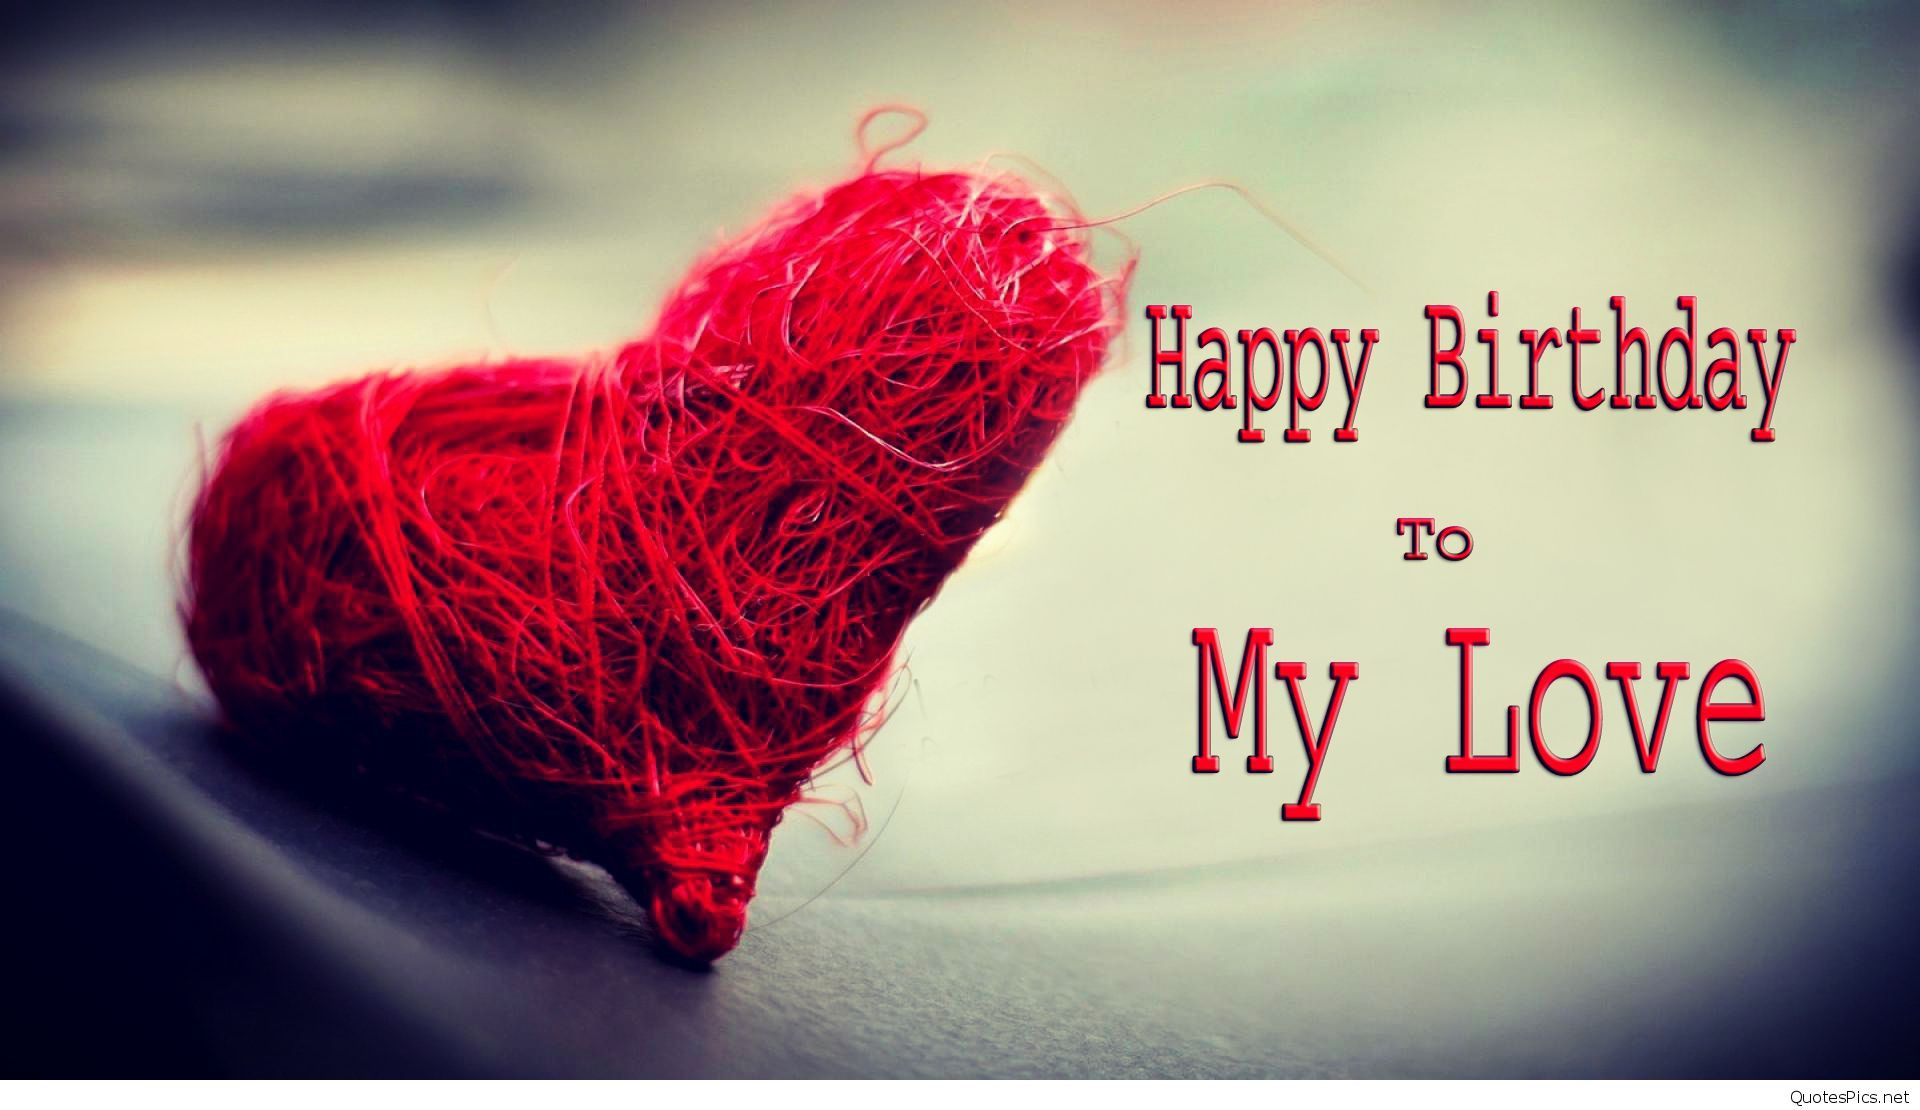 Birthday Quotes For My Love
 Love happy birthday wishes cards sayings